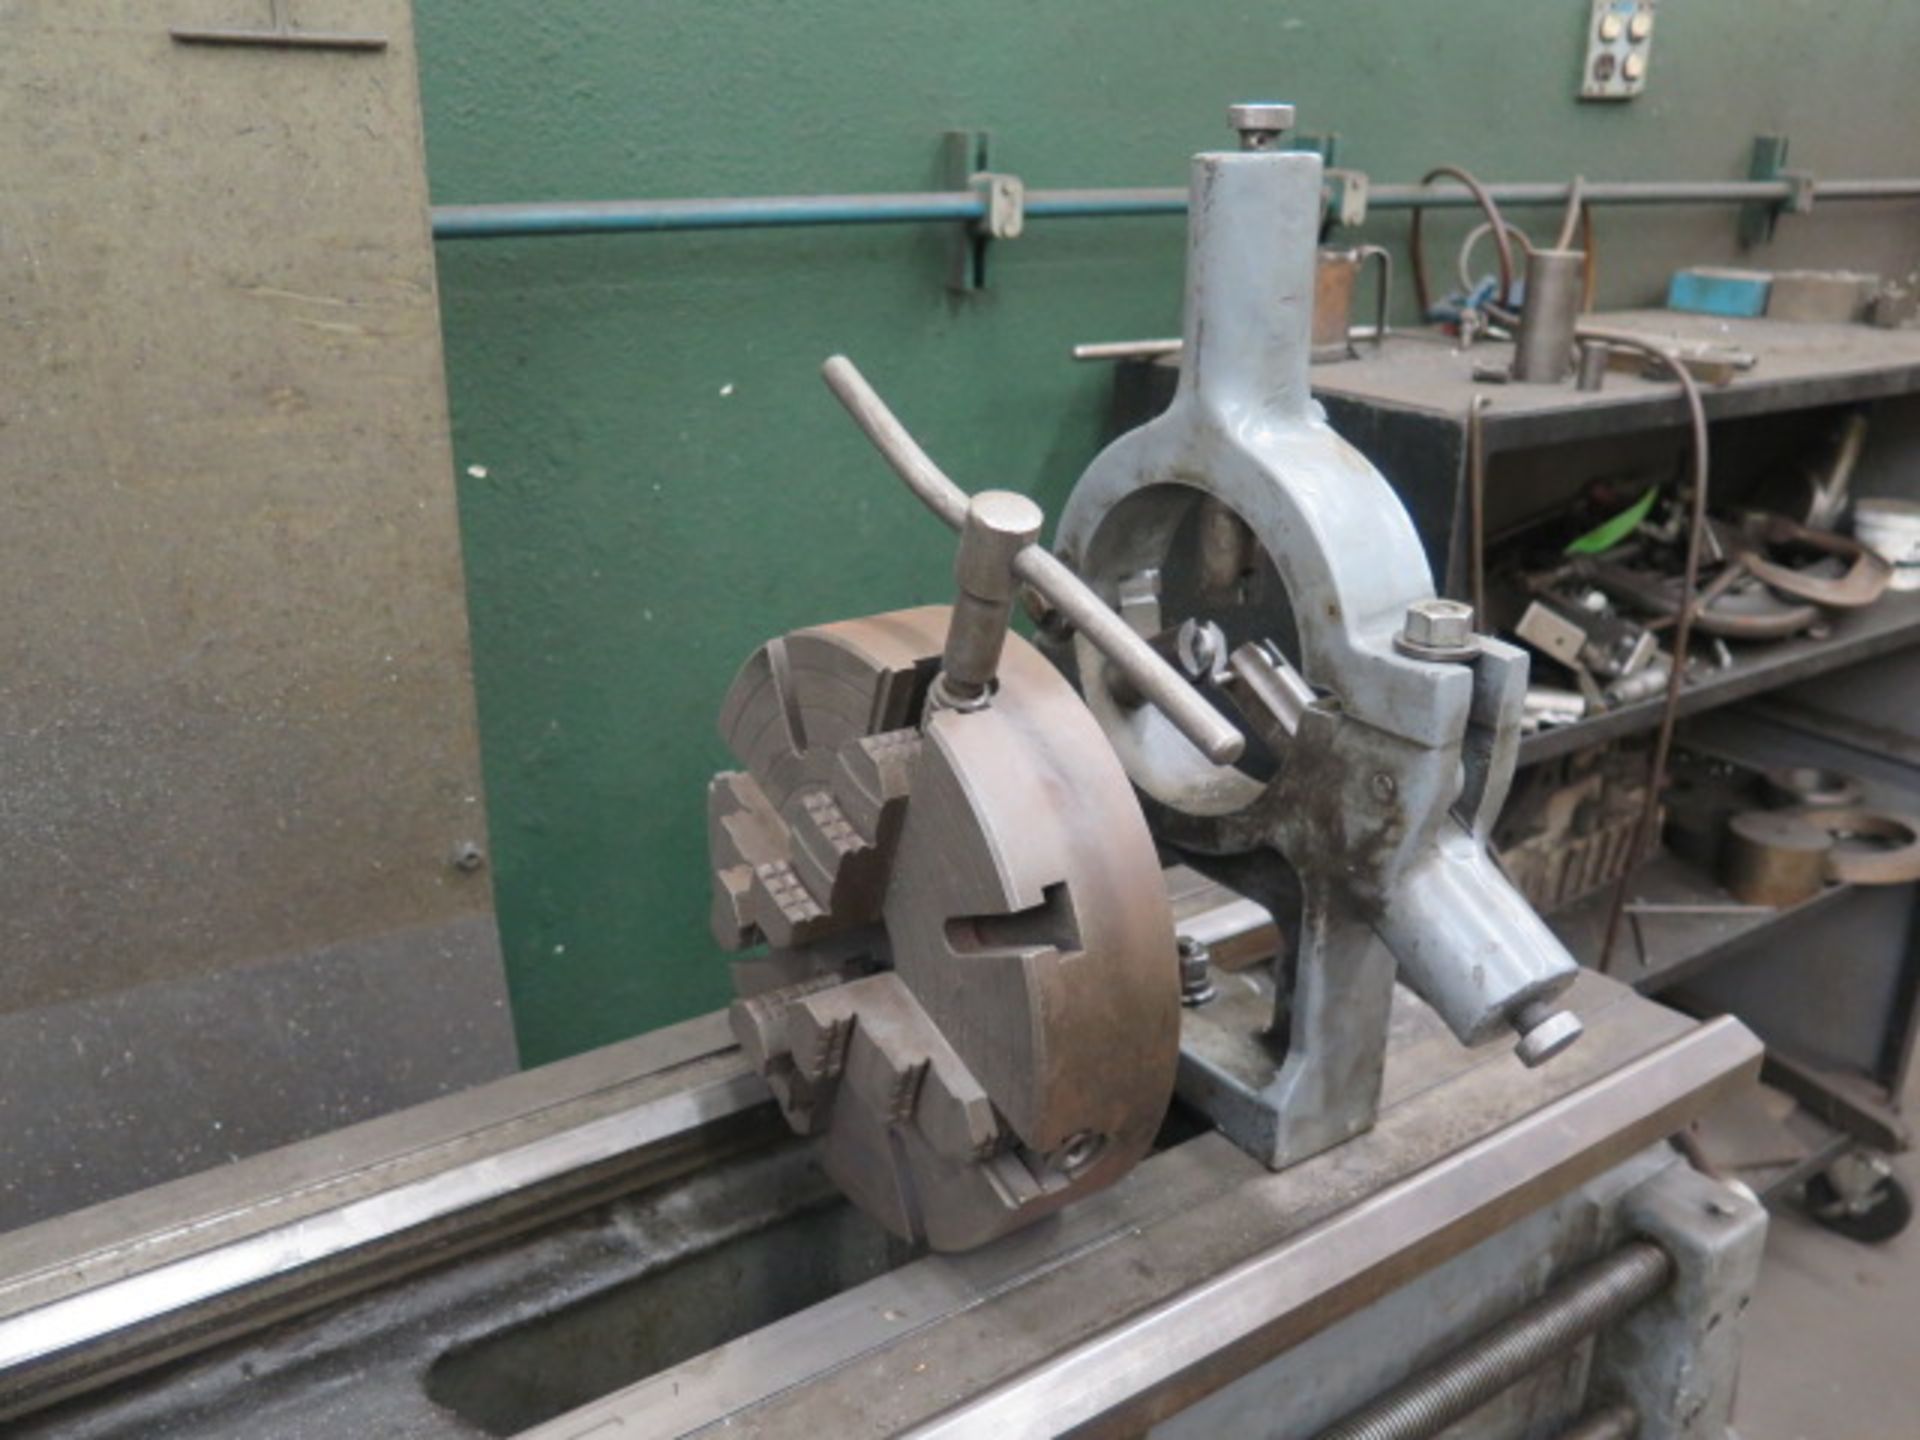 Merit 15" x 42" Lathe s/n 48752 w/ 30-1800 RPM, Inch Threading, Tailstock, Steady Rest, SOLD AS IS - Image 7 of 10